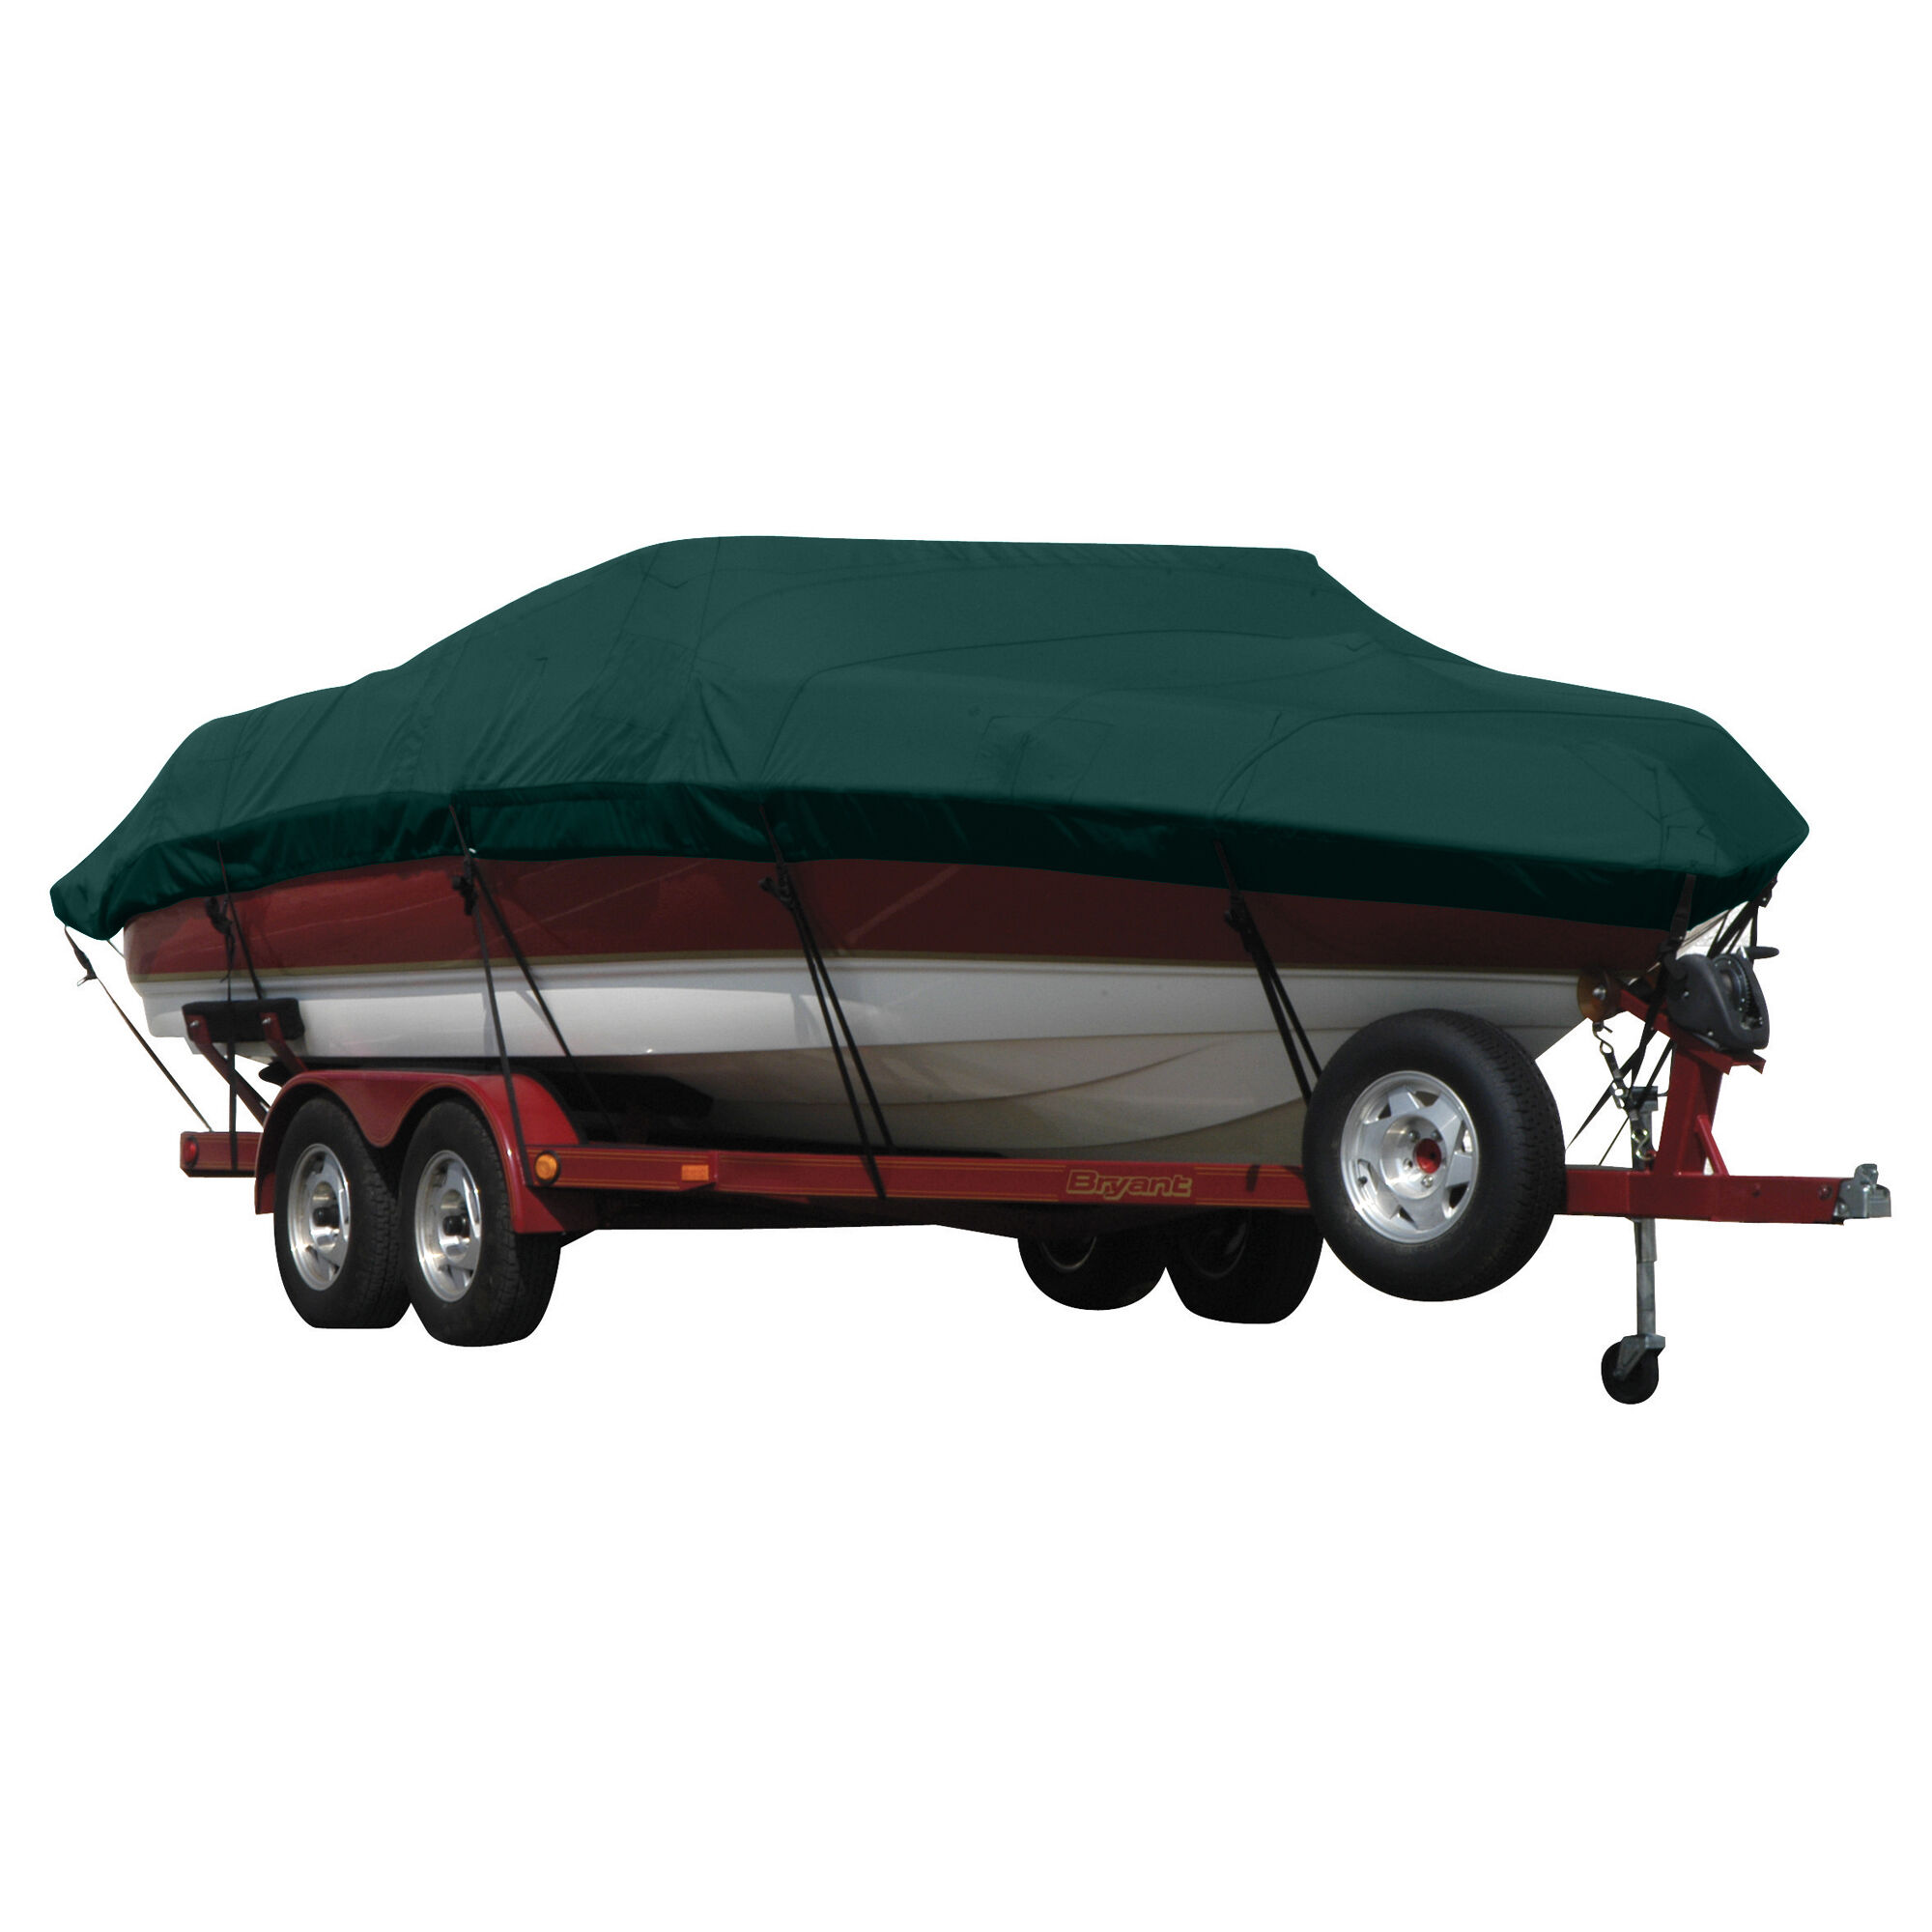 Covermate NITRO 188 SPT PT TROLLING MOTOR O/B Boat Cover in Forest Green